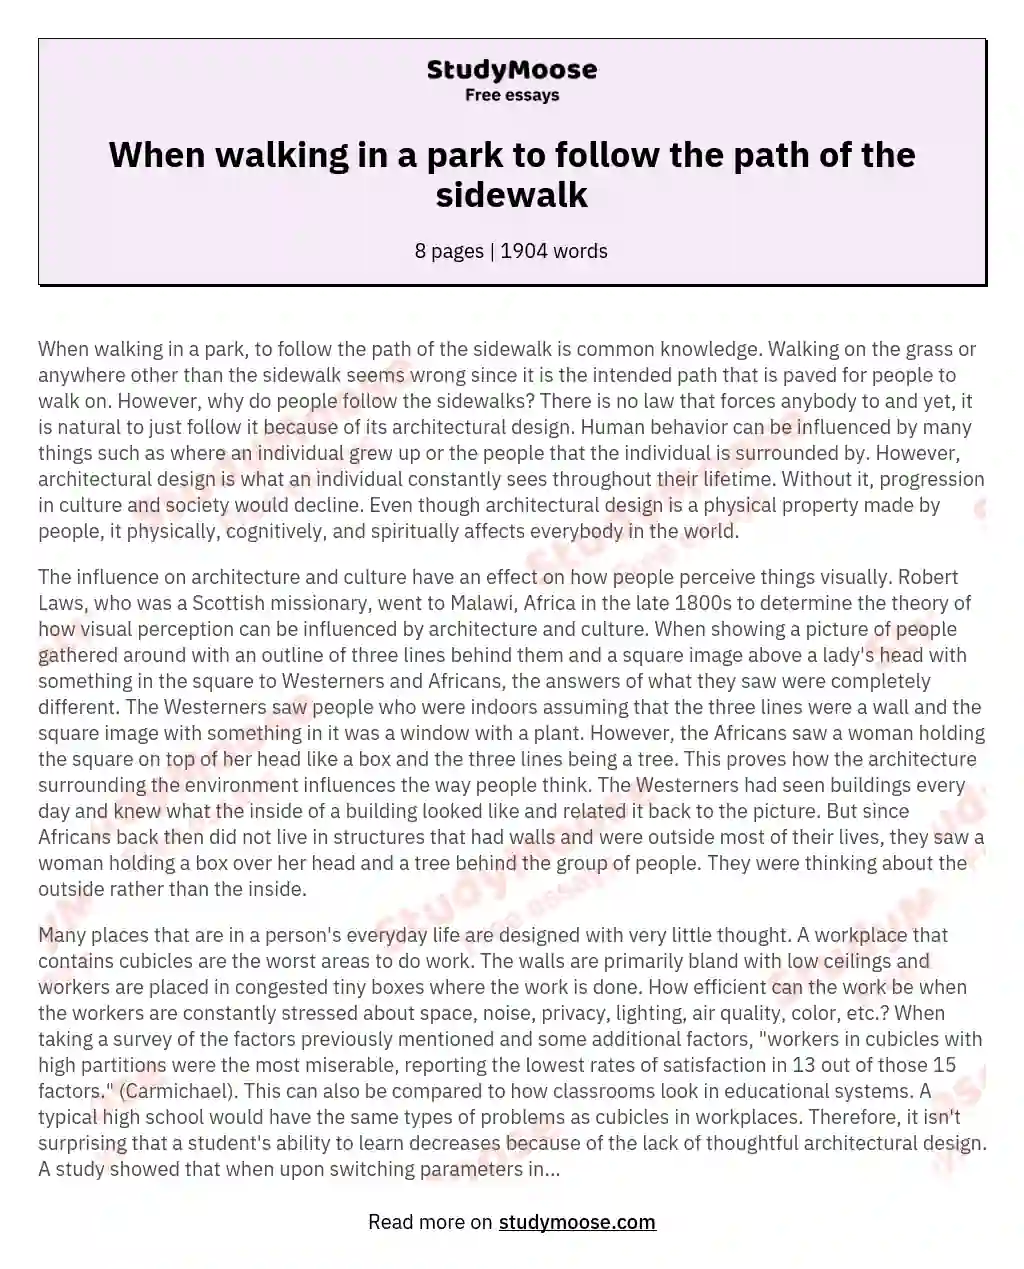 When walking in a park to follow the path of the sidewalk essay